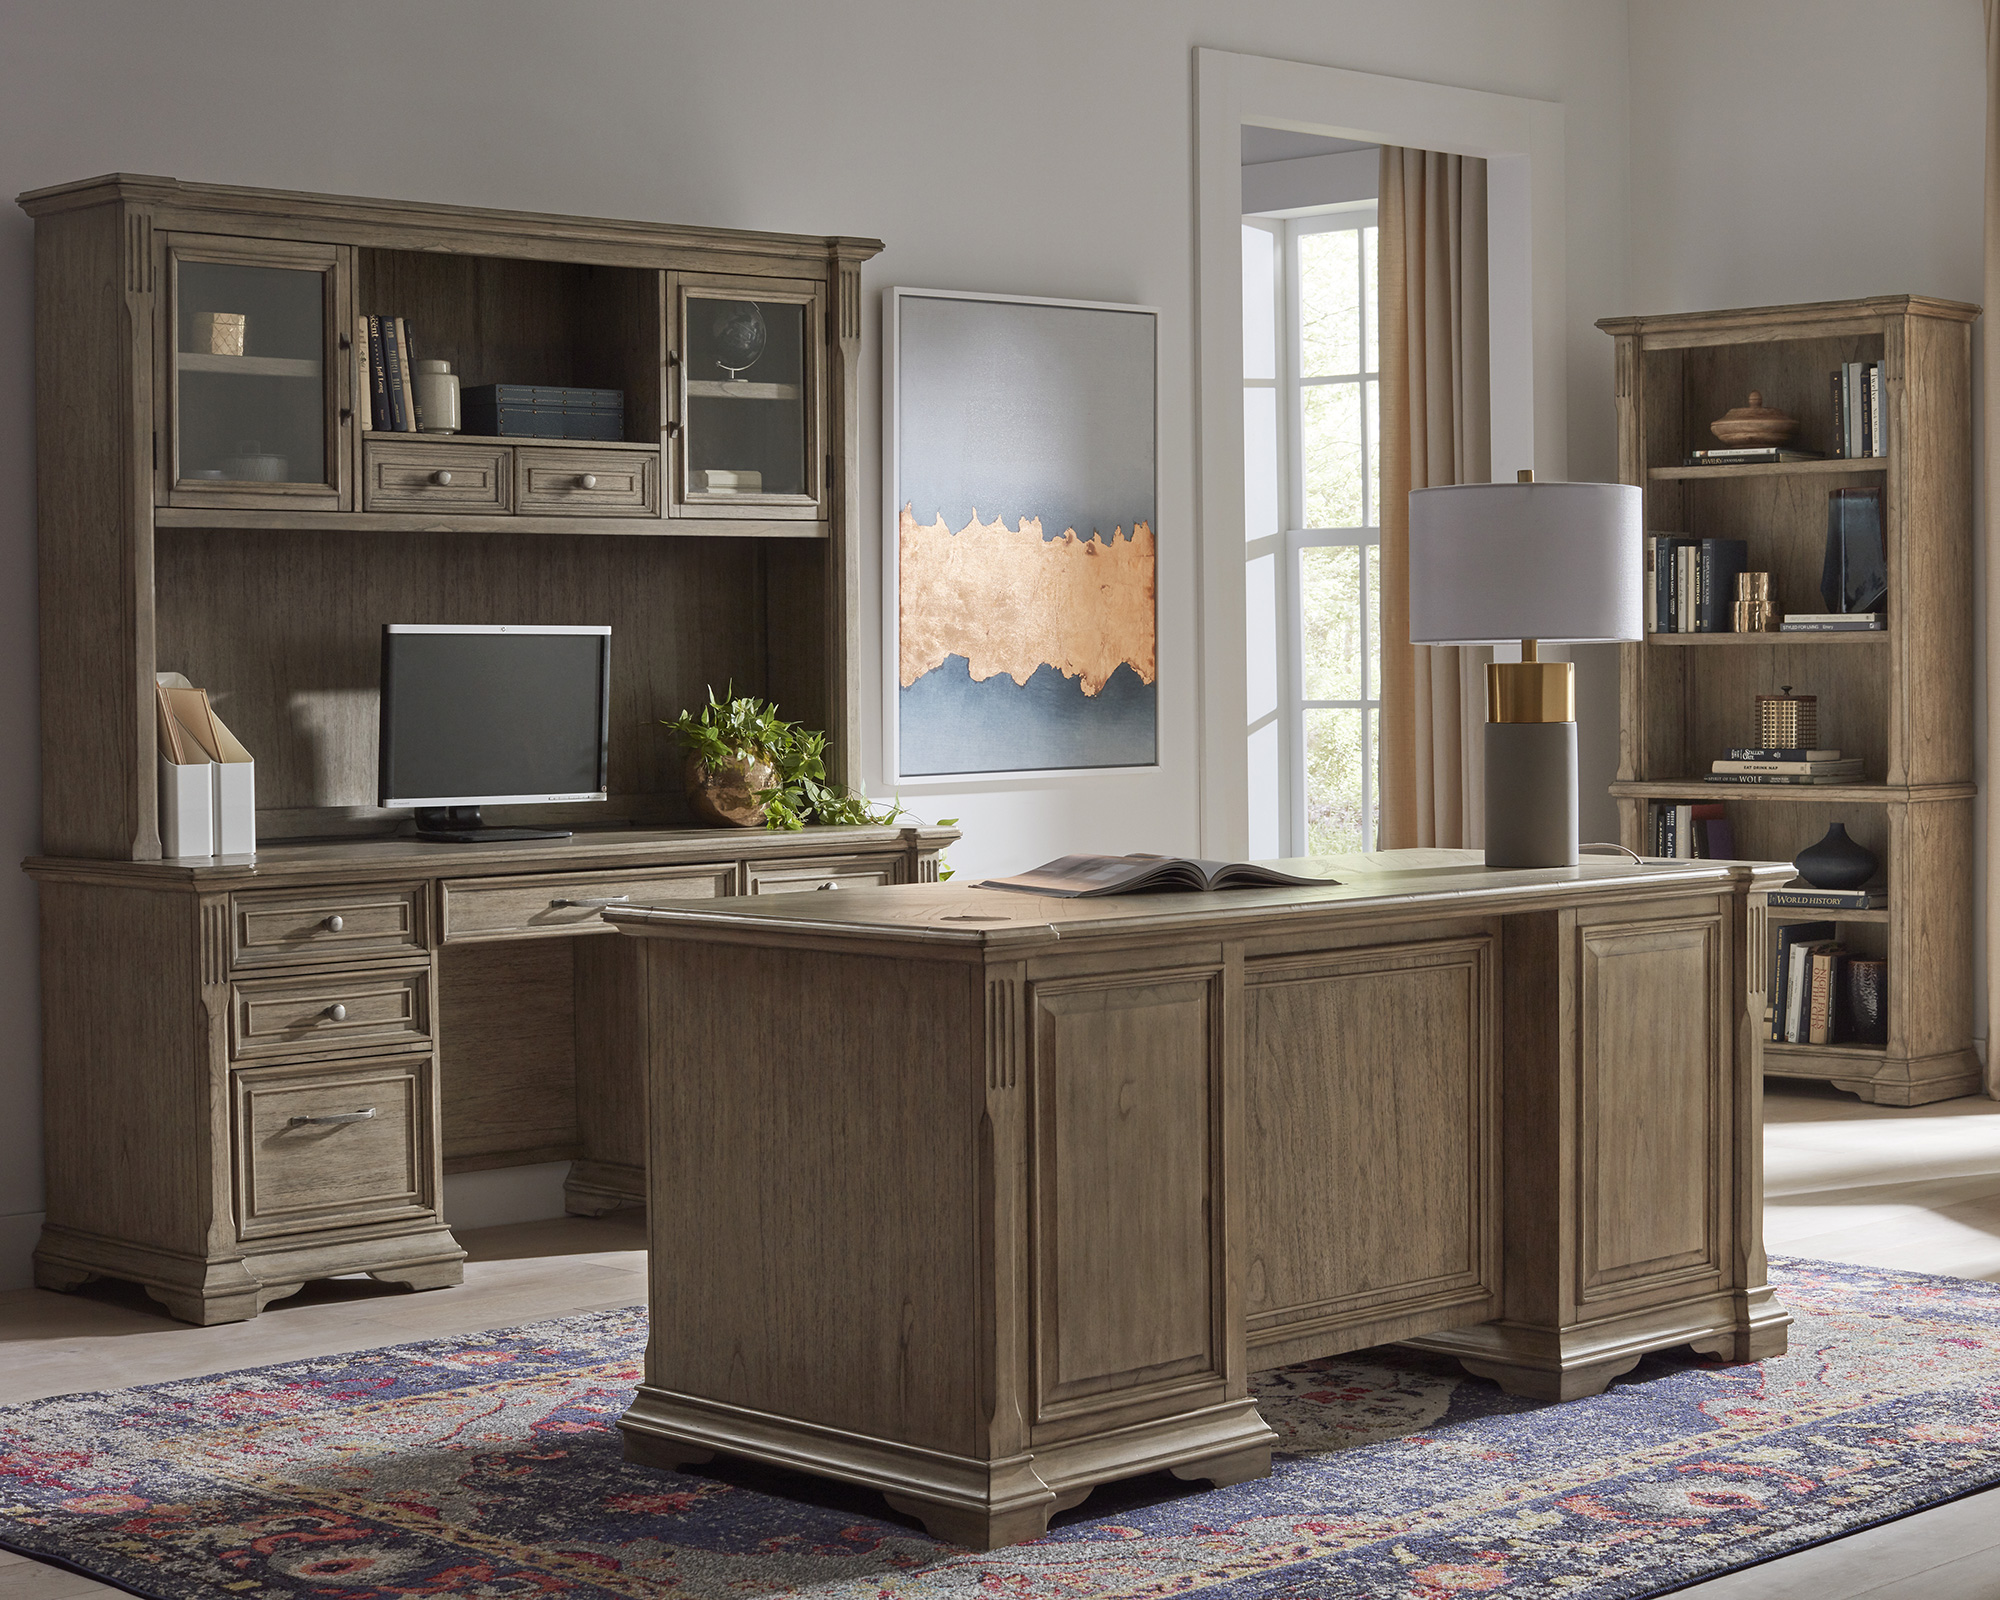 Martin Furniture Bristol Office collection in home office setting